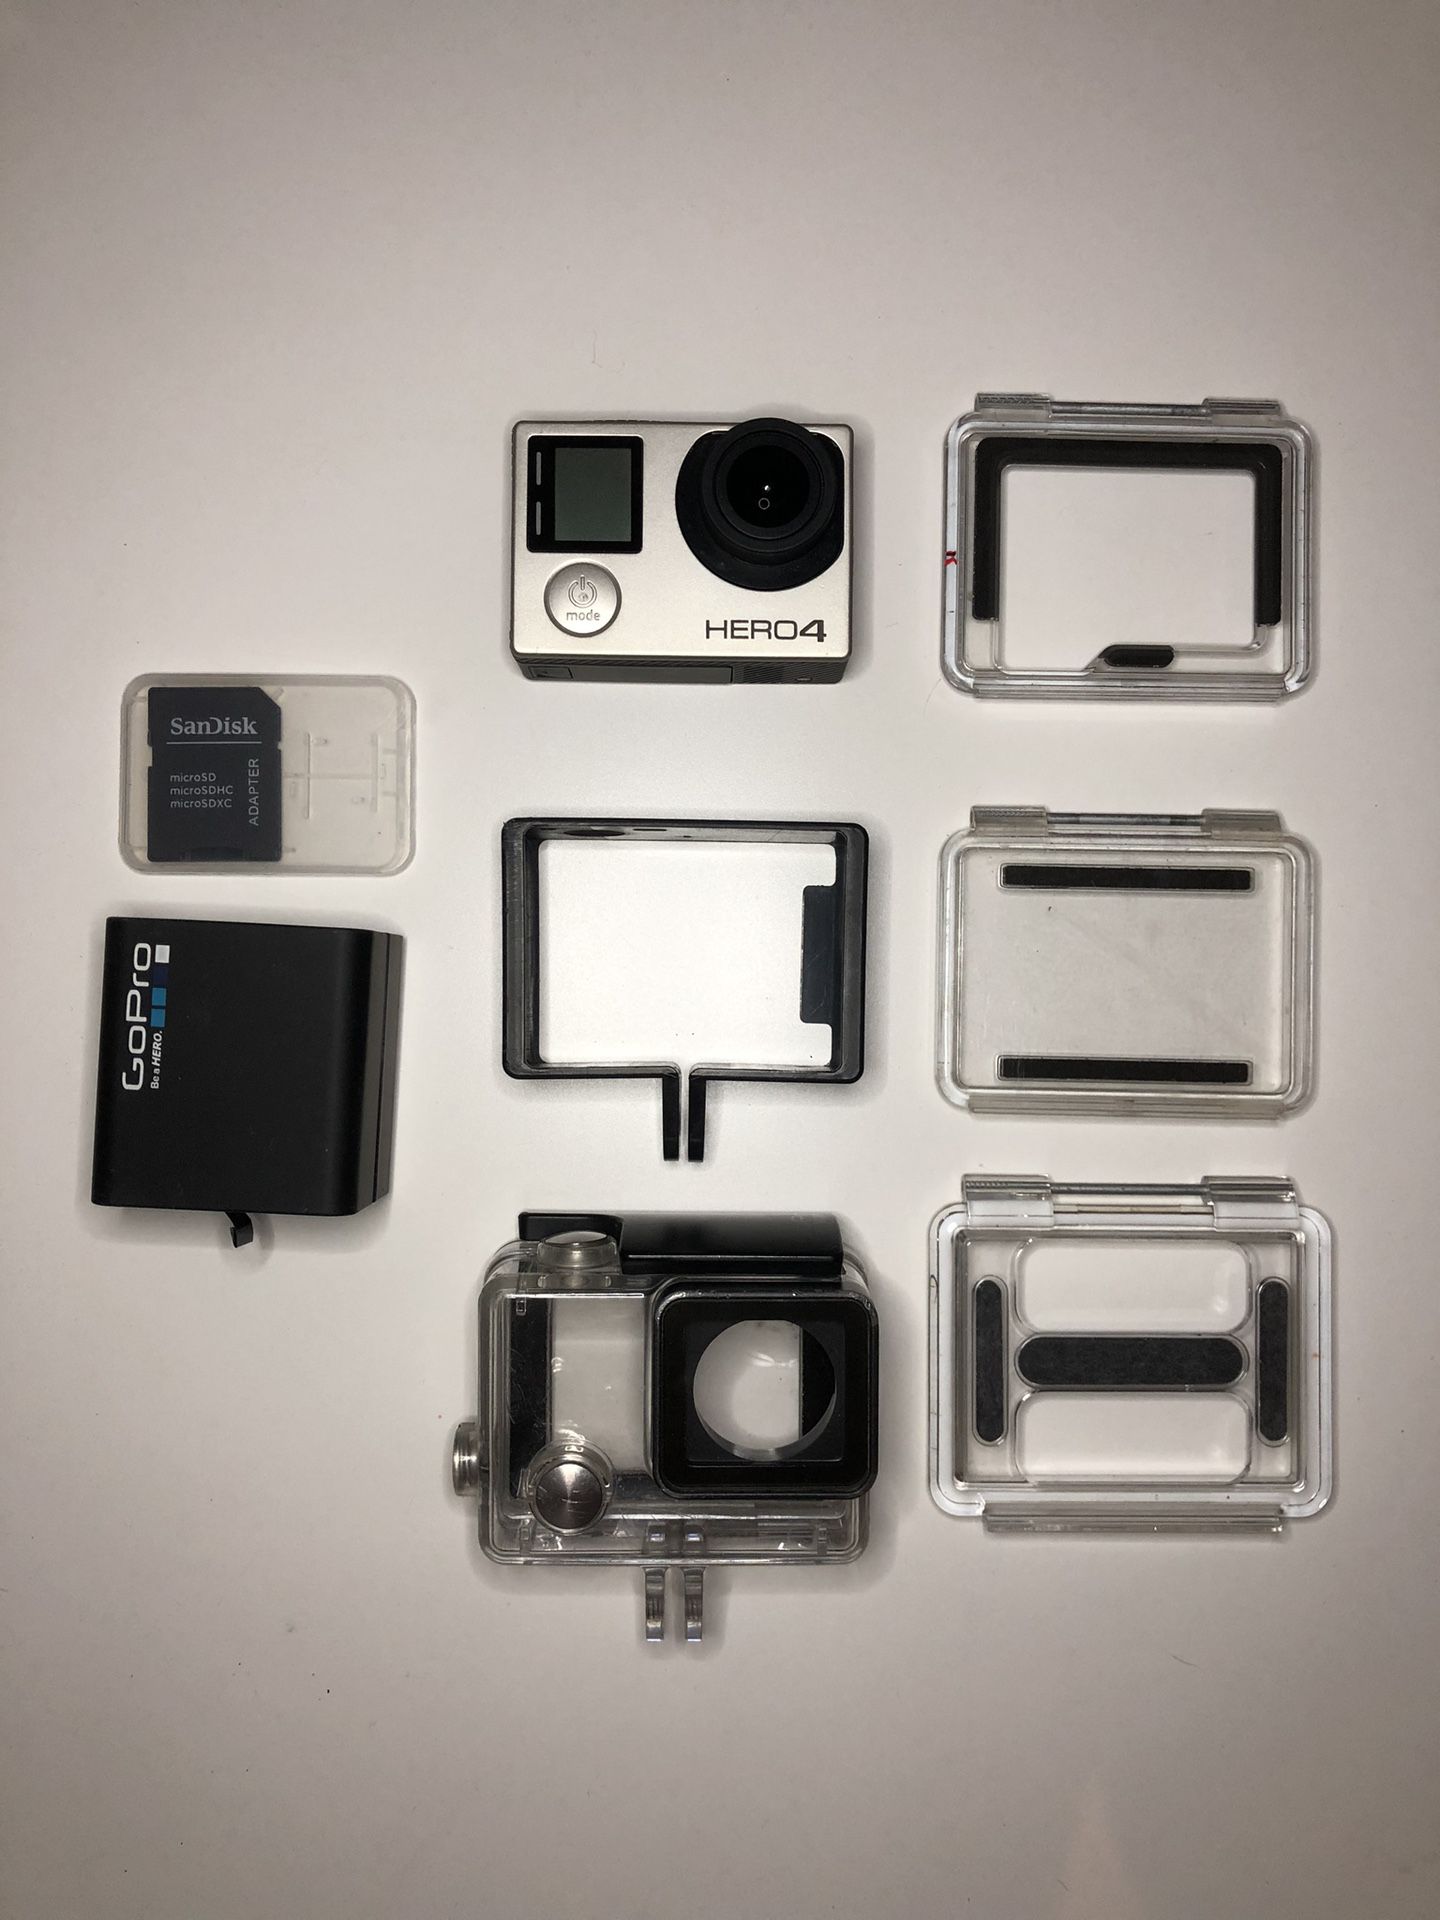 GoPro Hero4 with accessories